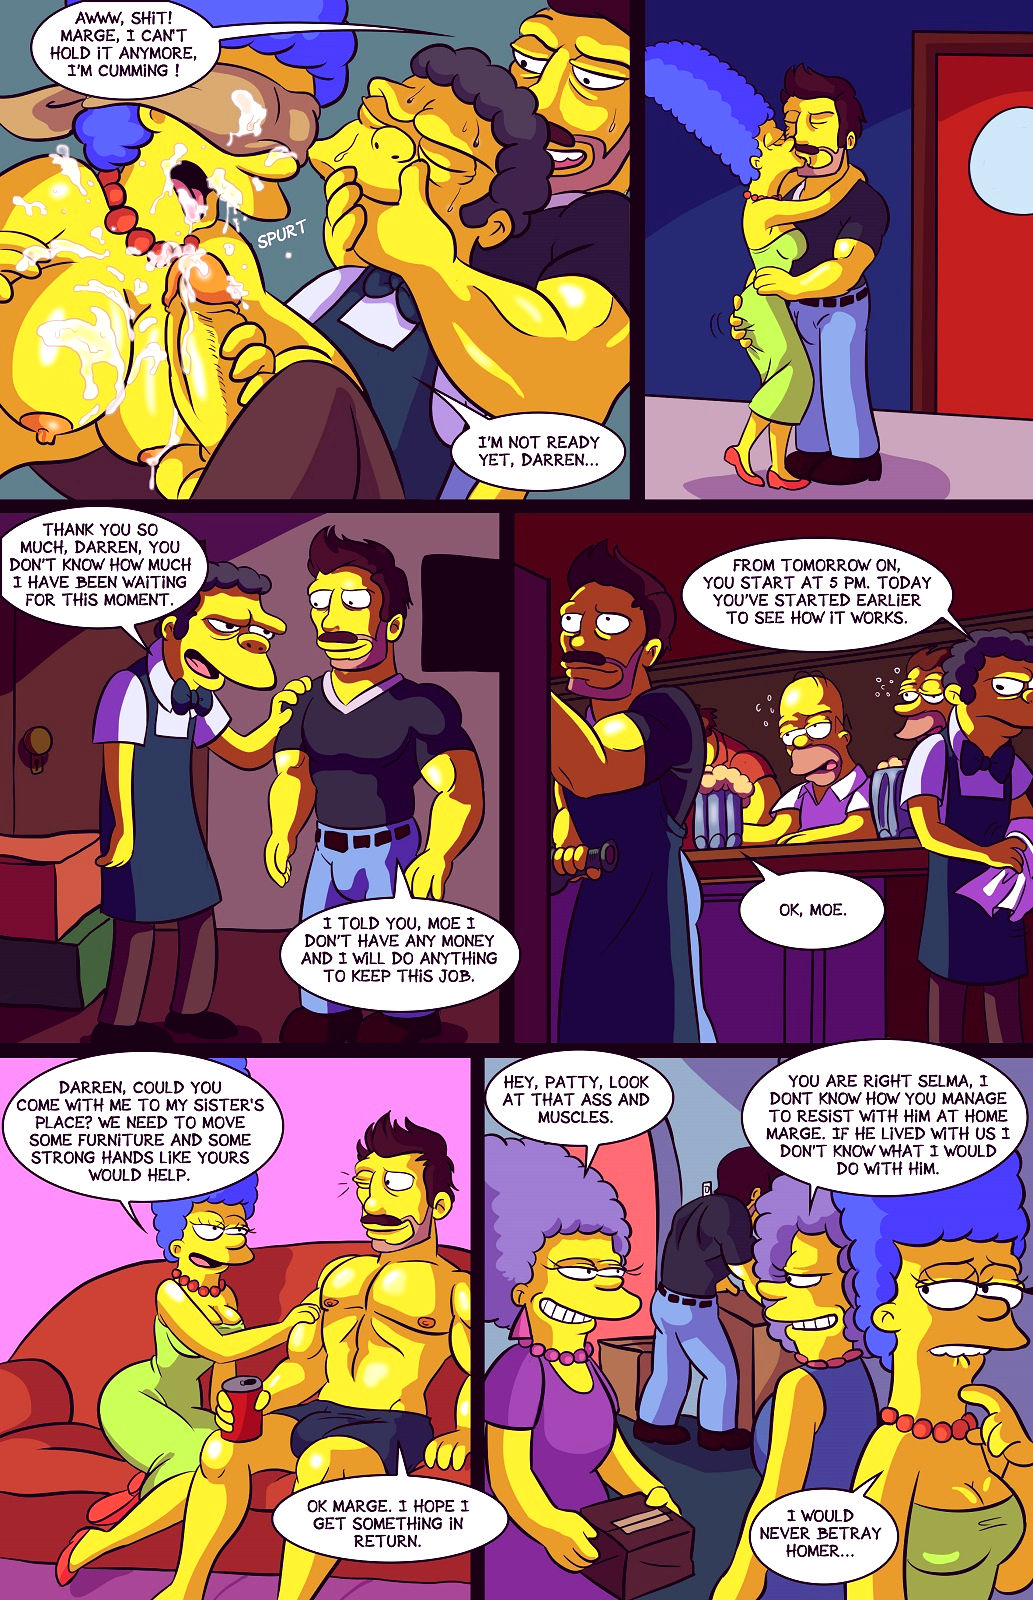 Darrens adventure or welcome to springfield porn comic picture 8